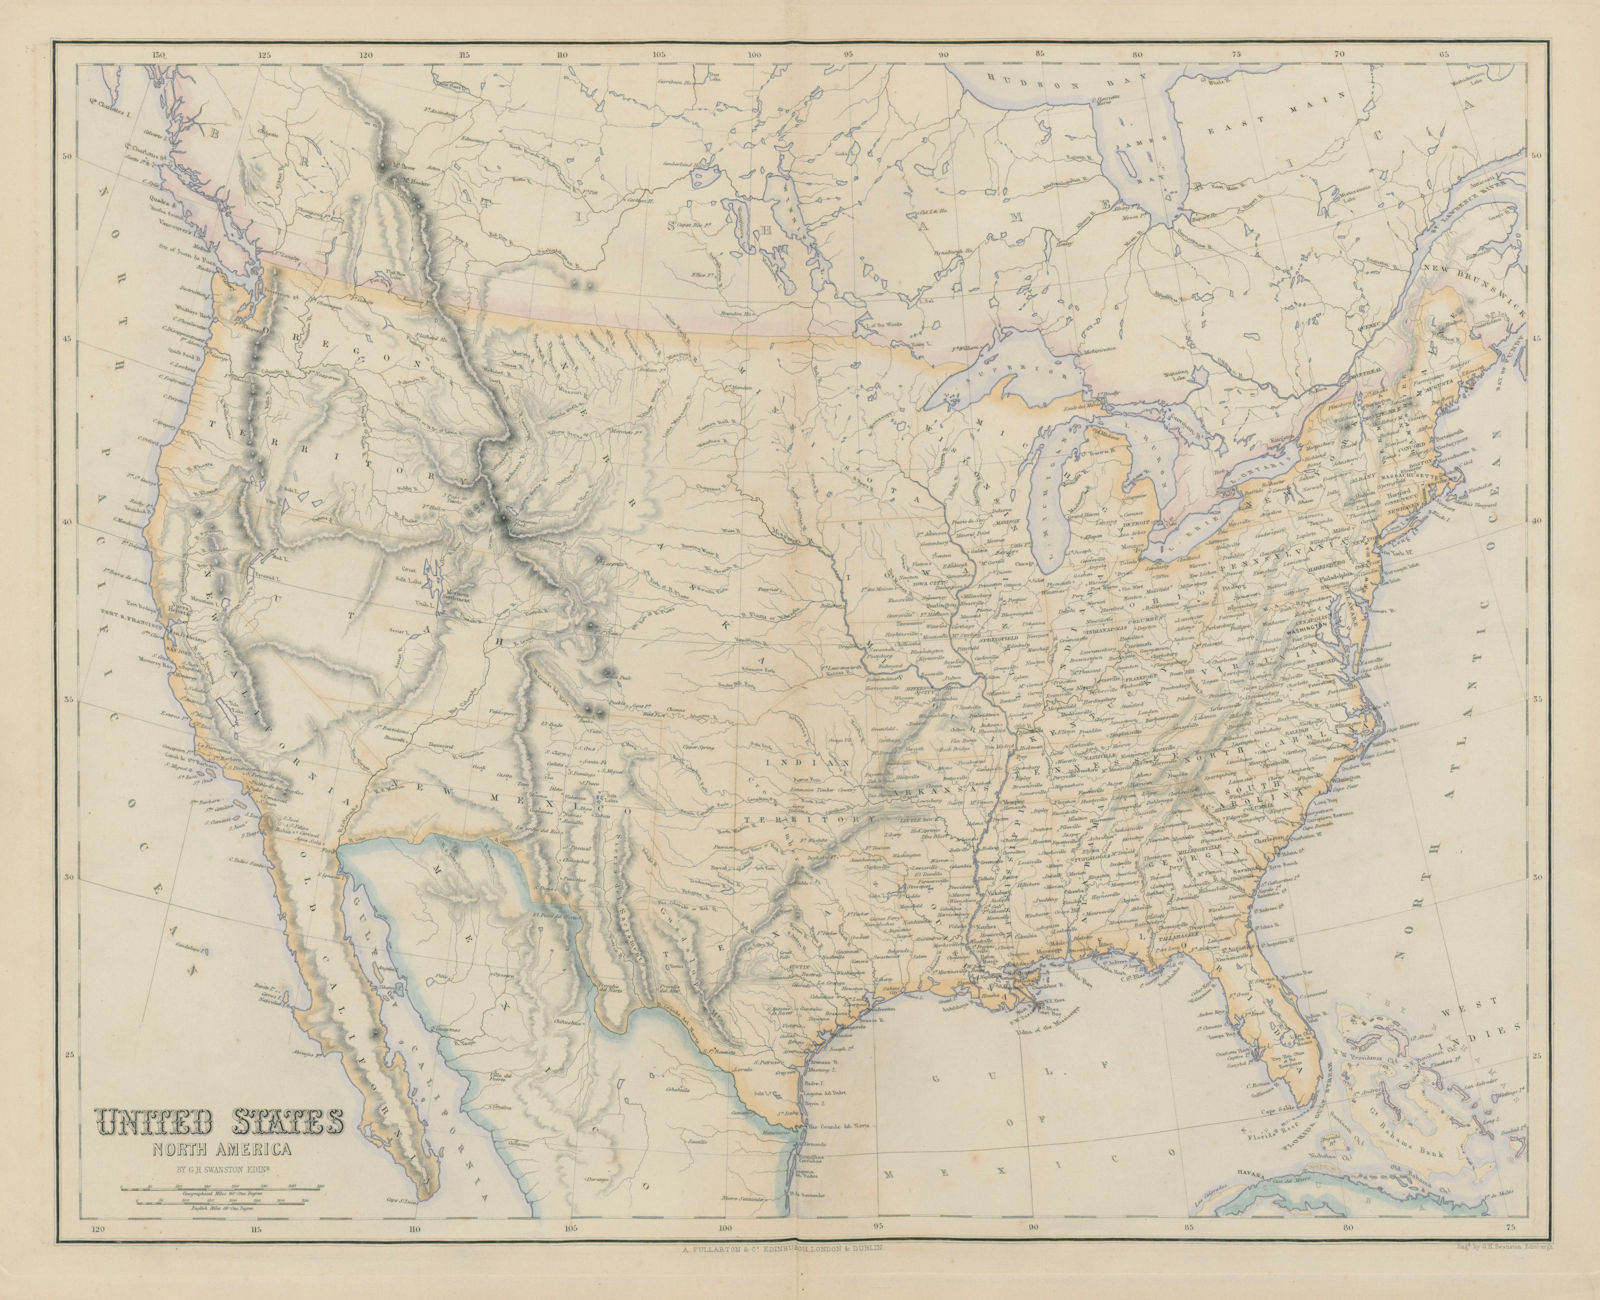 Associate Product United States. "New California". Oregon Territory. SWANSTON 1860 old map